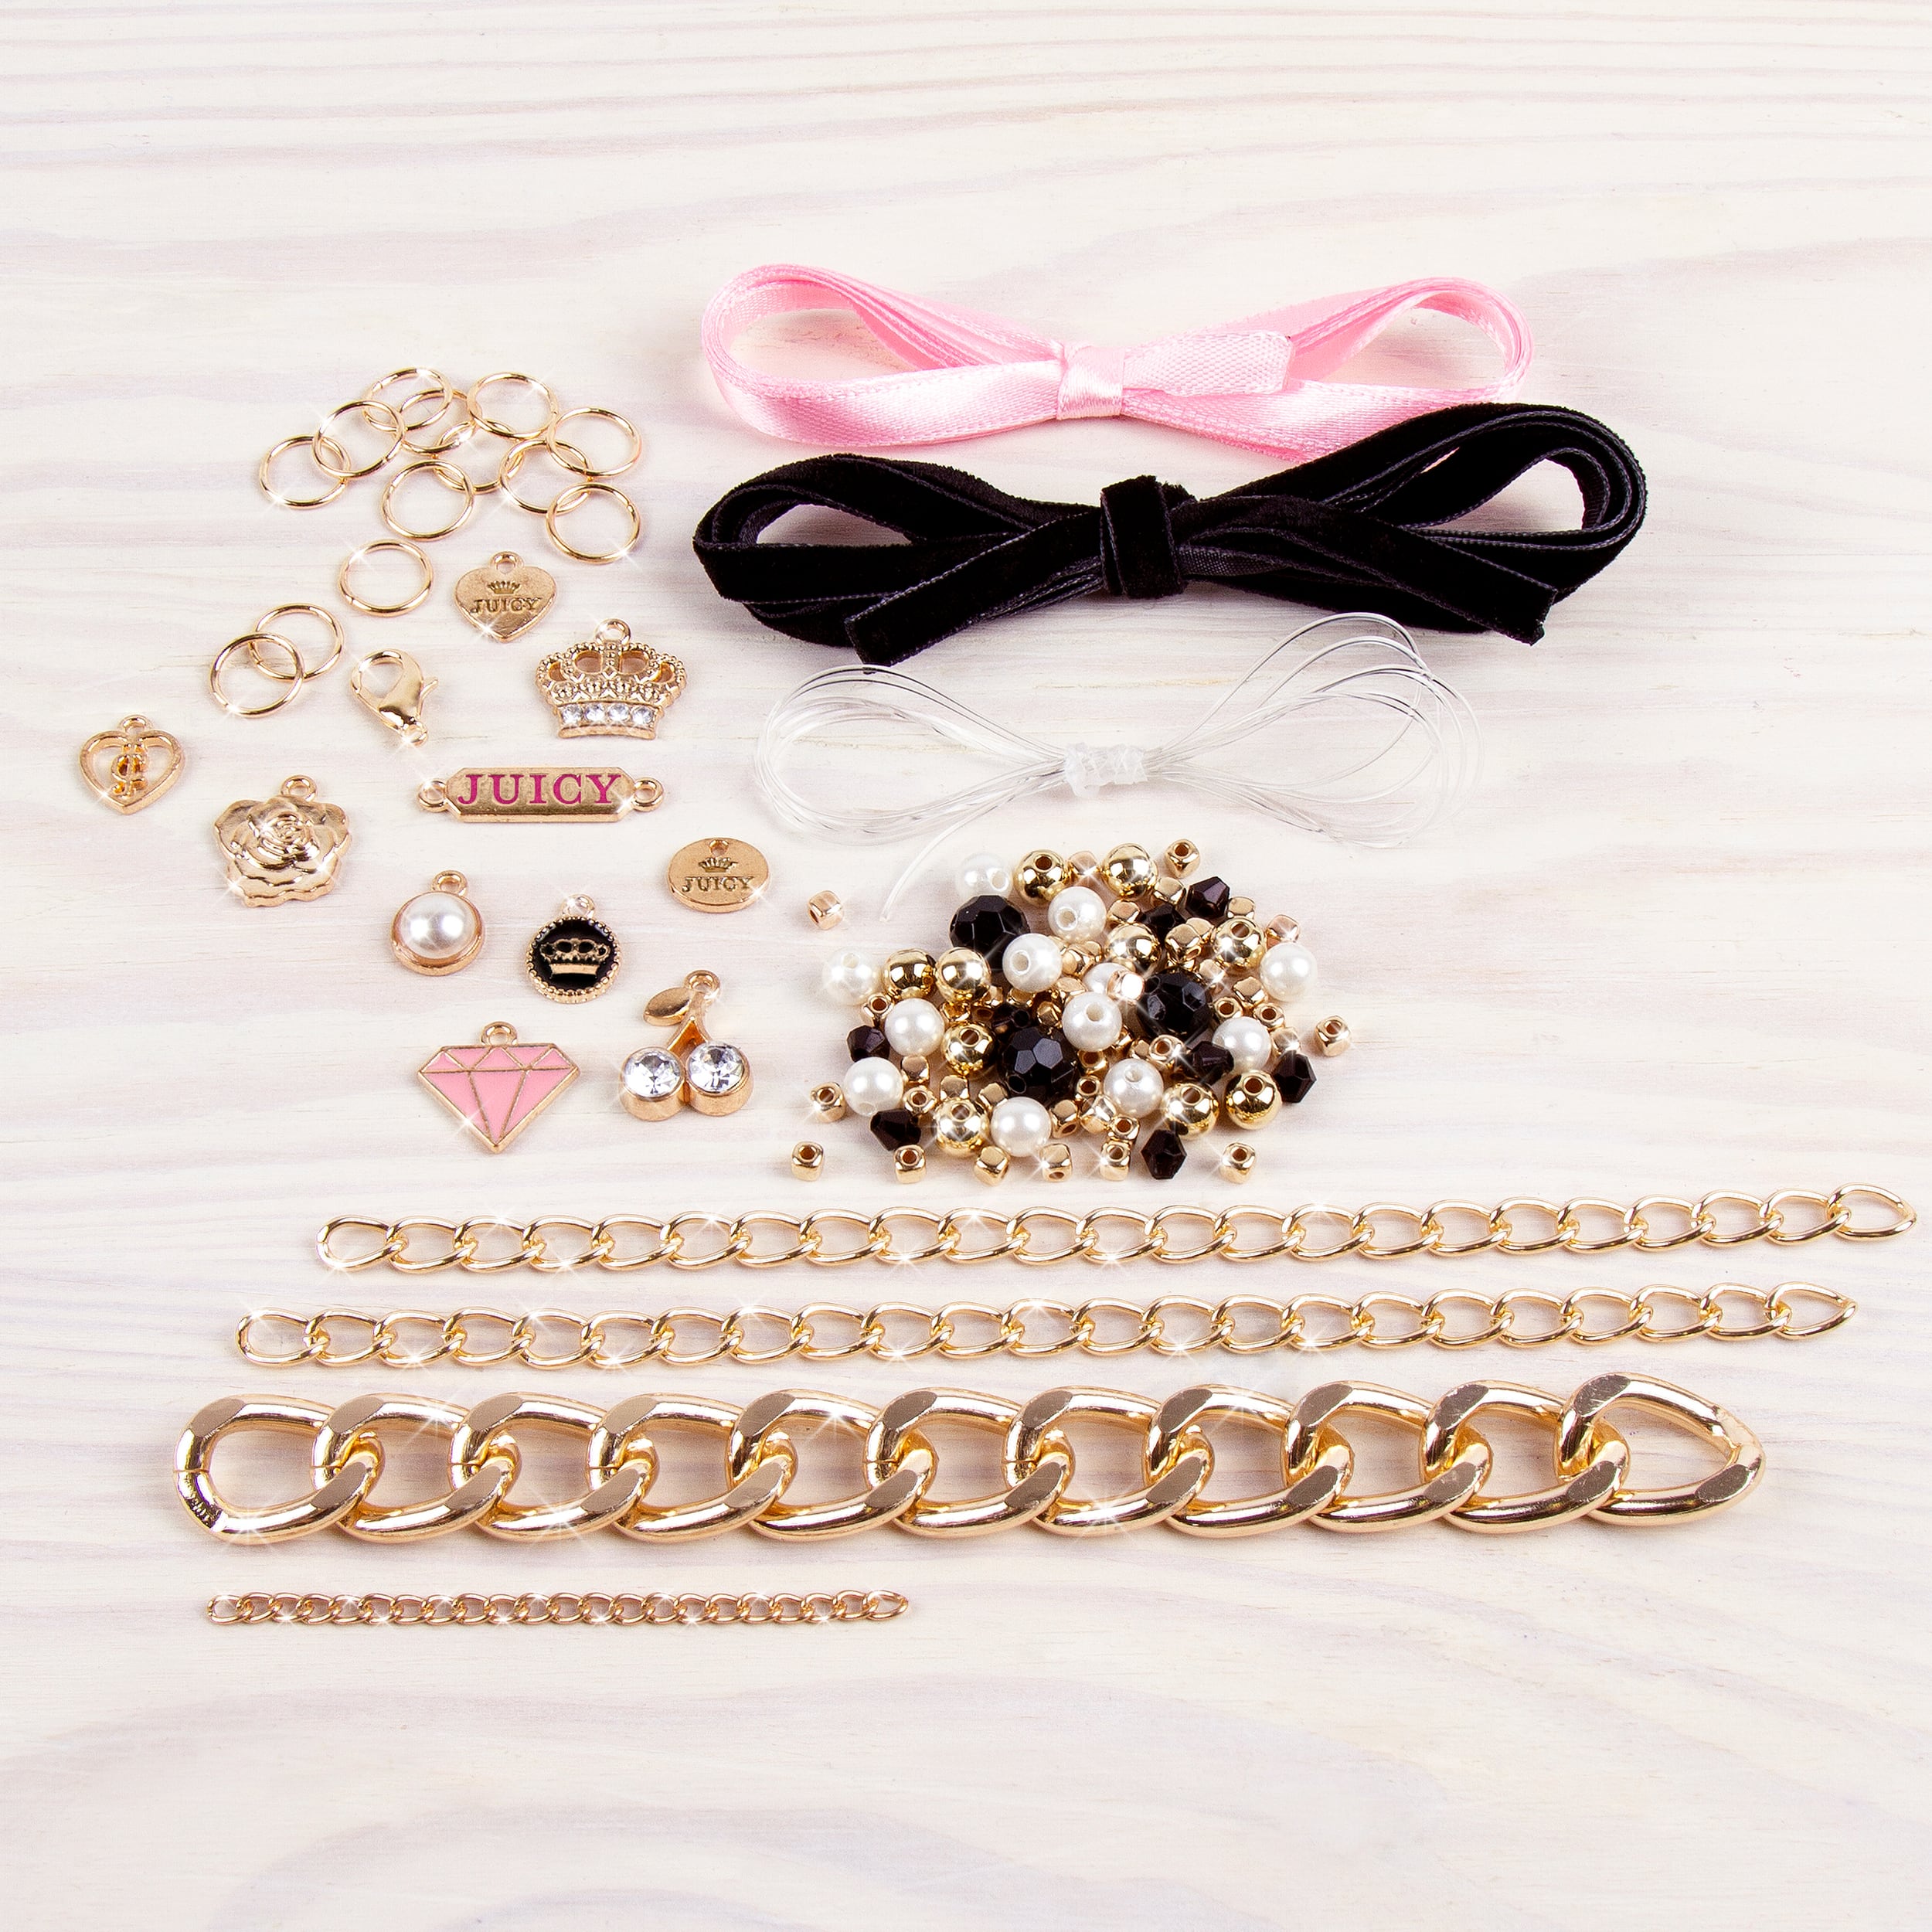 Juicy Couture Make it Real™ Absolutely Charming Bracelet Kit, Michaels